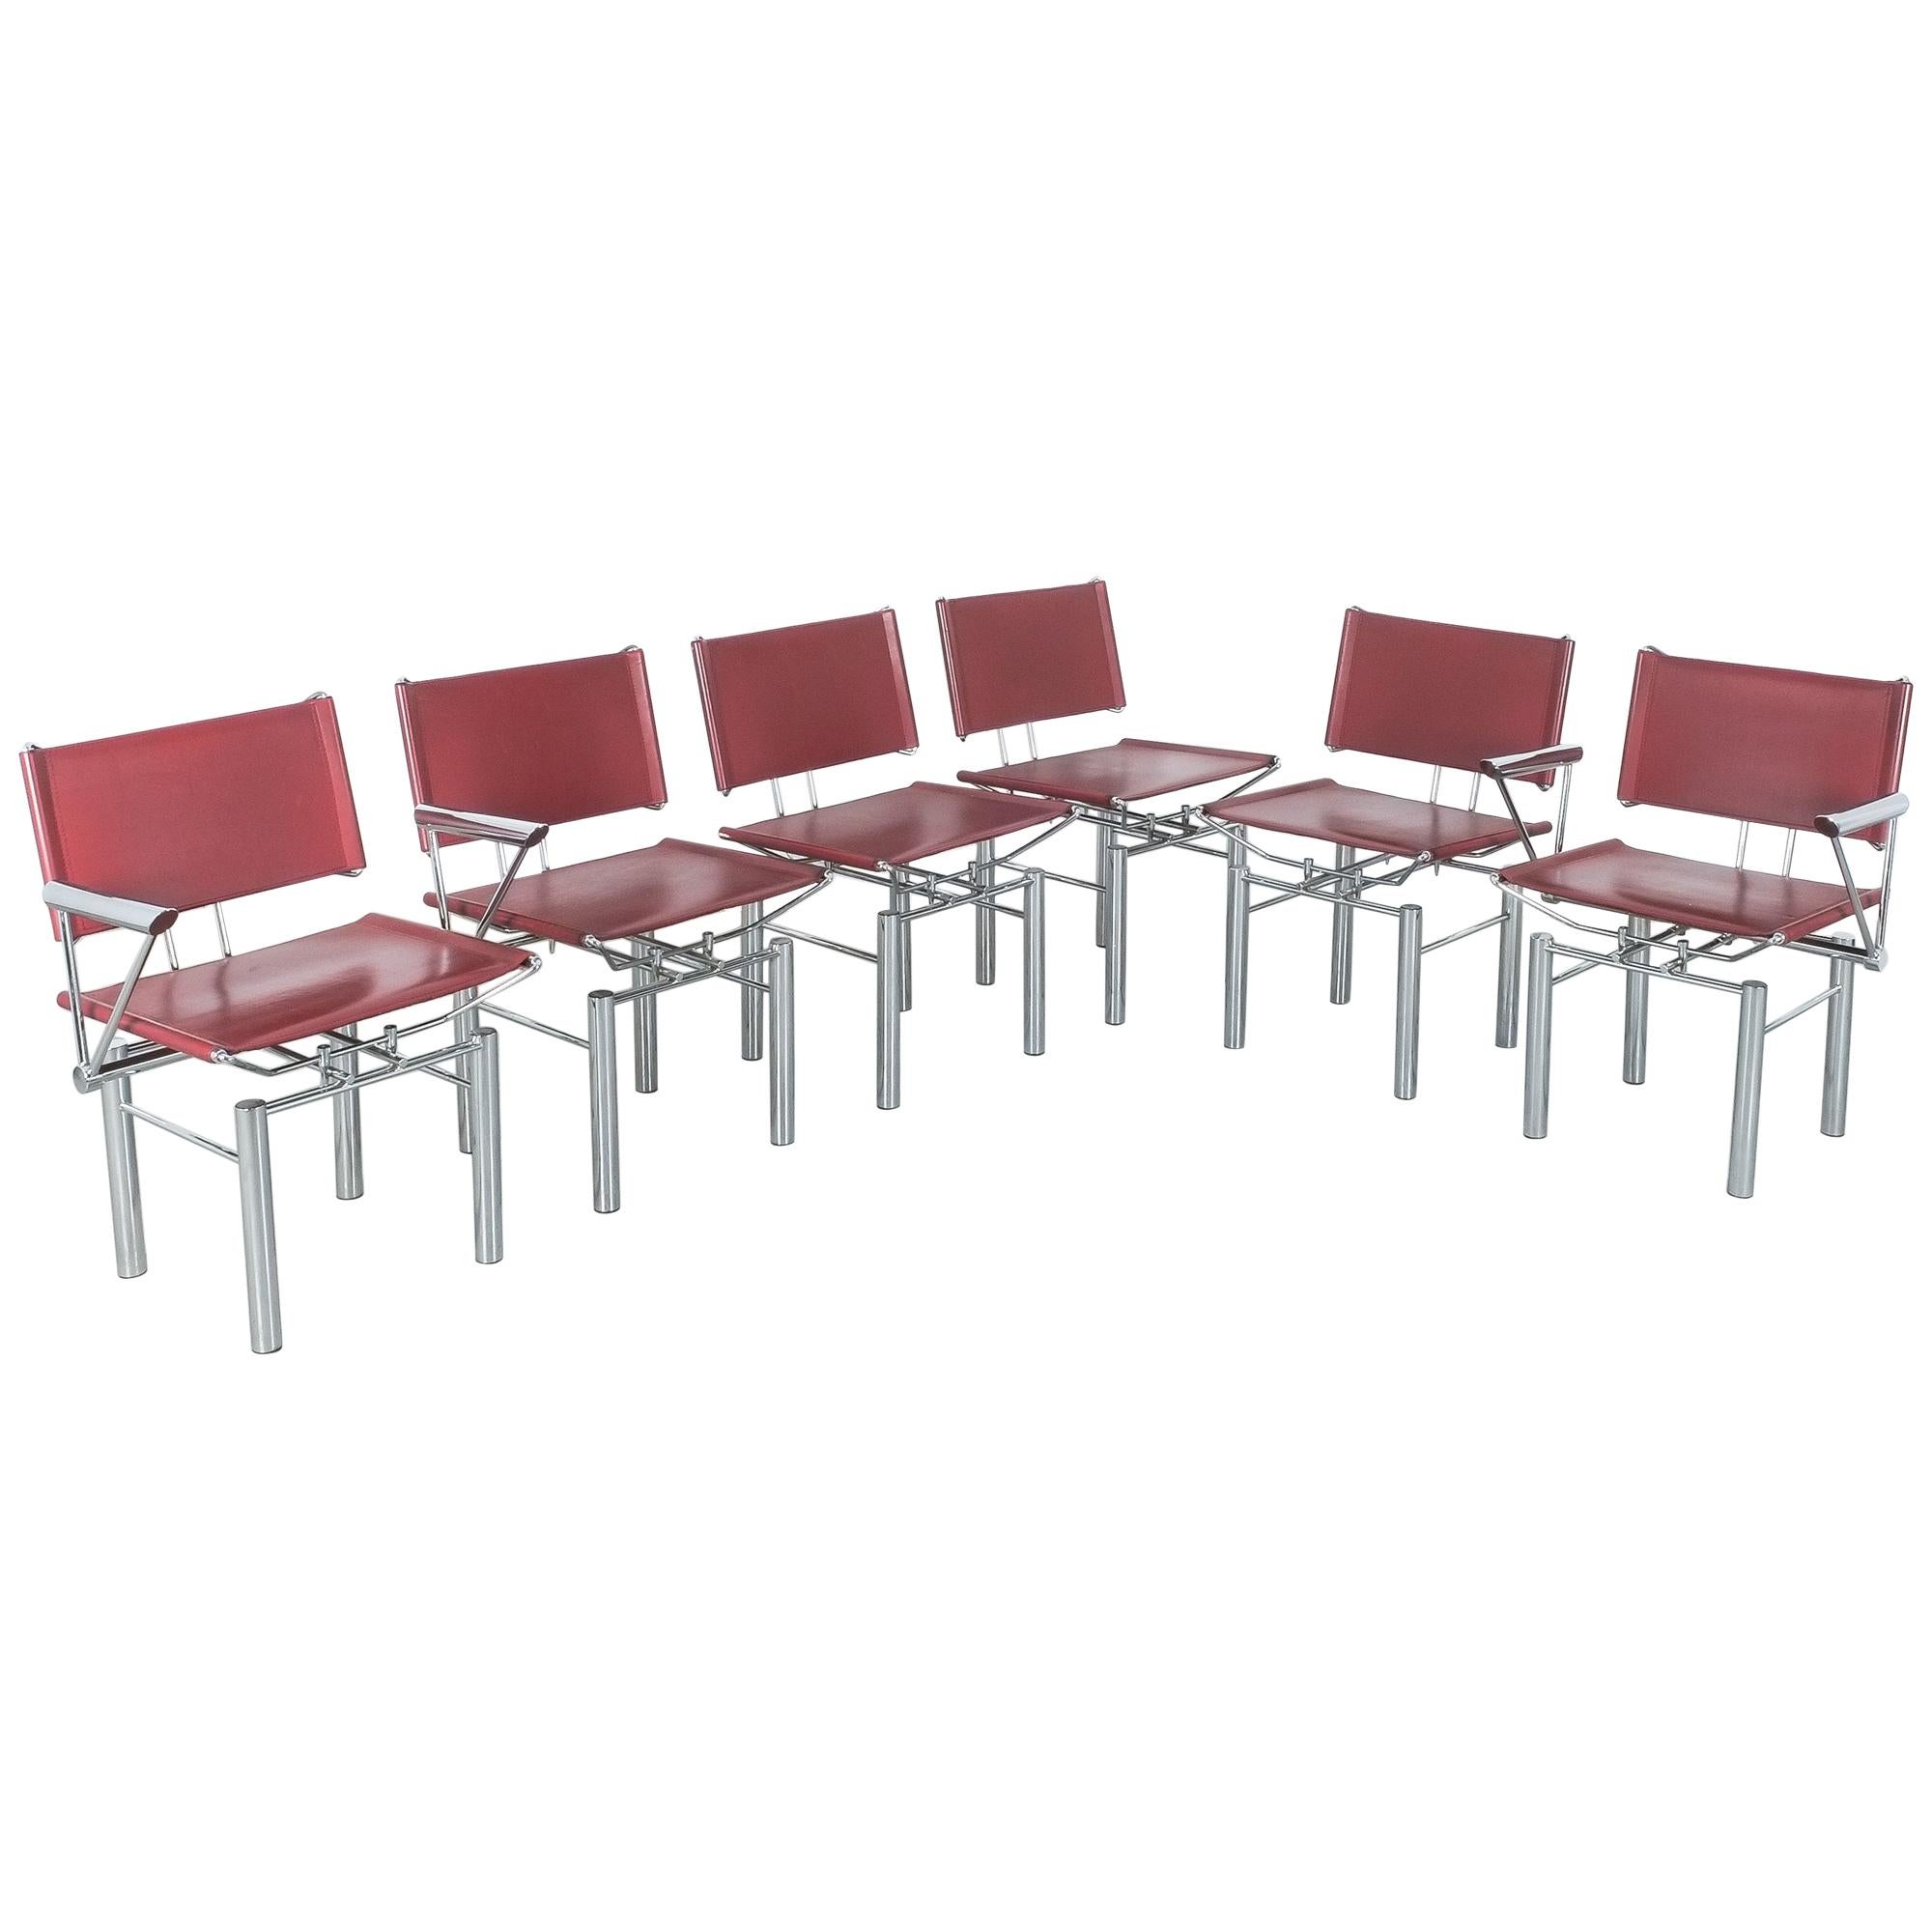 Hans Ullrich Bitsch Chairs Set of 6 Red Leather Chrome Metal Series 8600, 1980